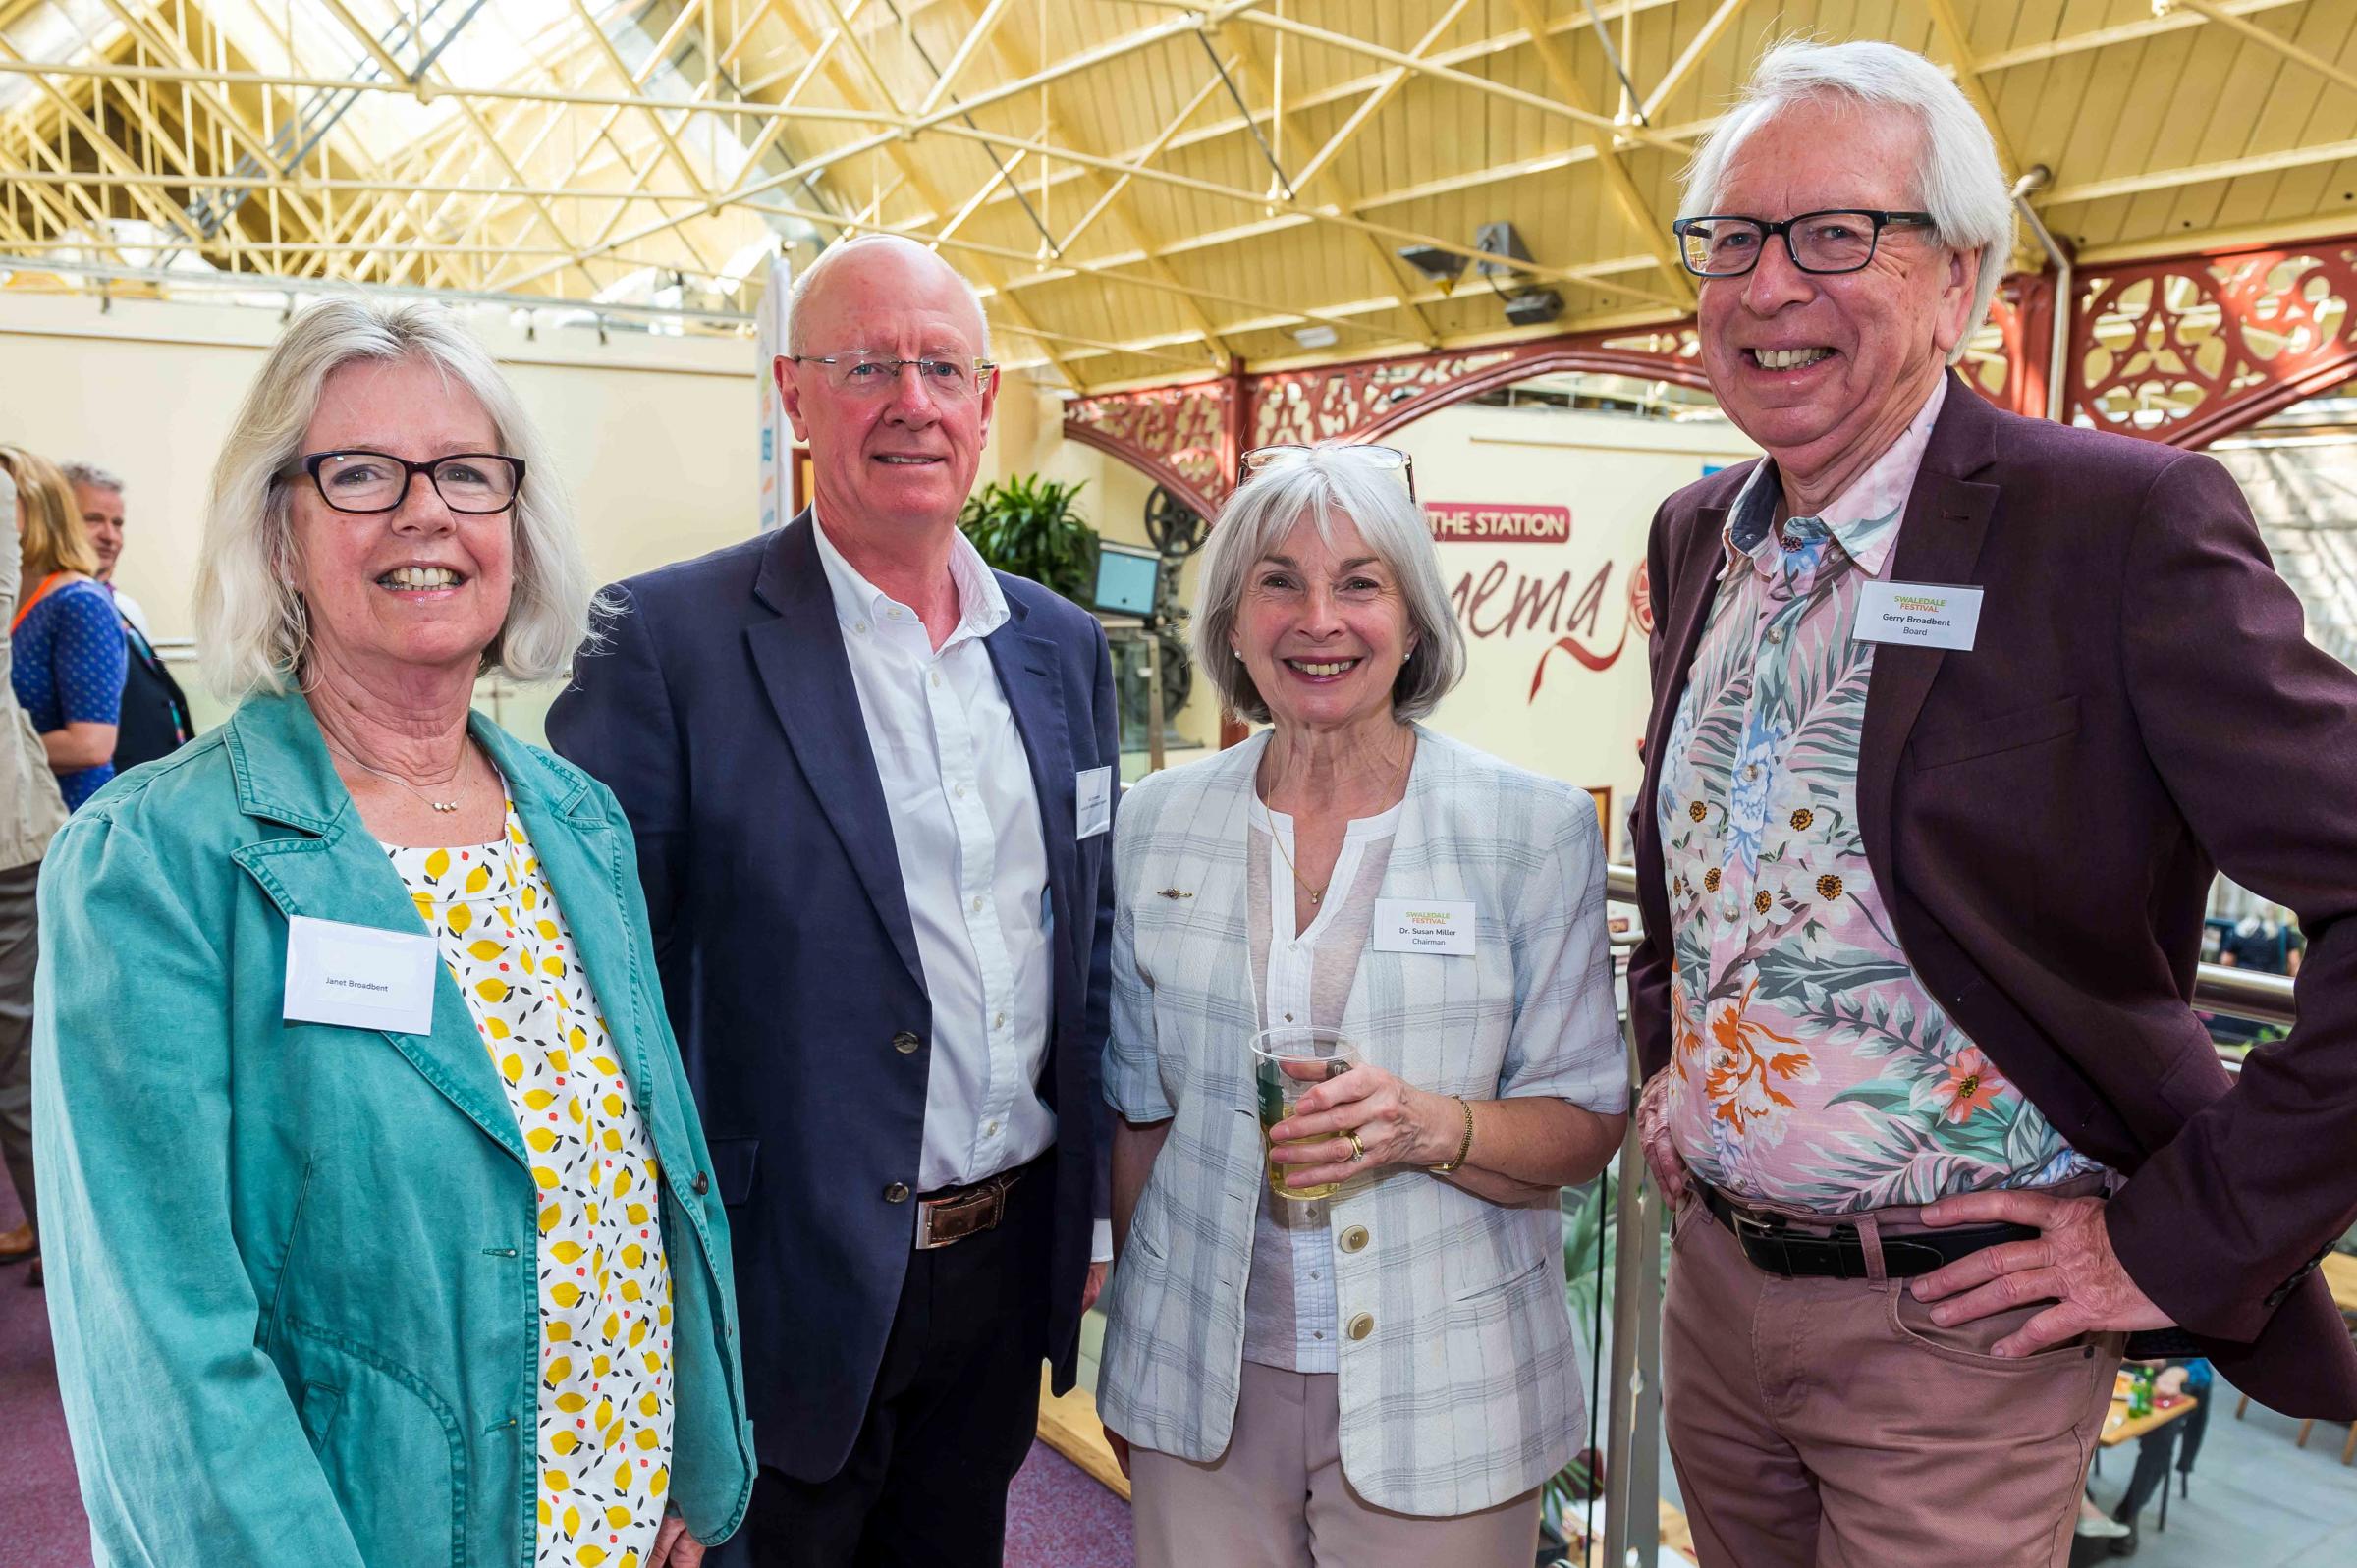 From left, Jan Broadbent, Neil Stevenson, Dr Susan Miller (Festival Chairman), and Gerry Broadbent at Swaledale Festival Chairmans Reception Picture: Gray Walker - Scenicview Gallery & Studio